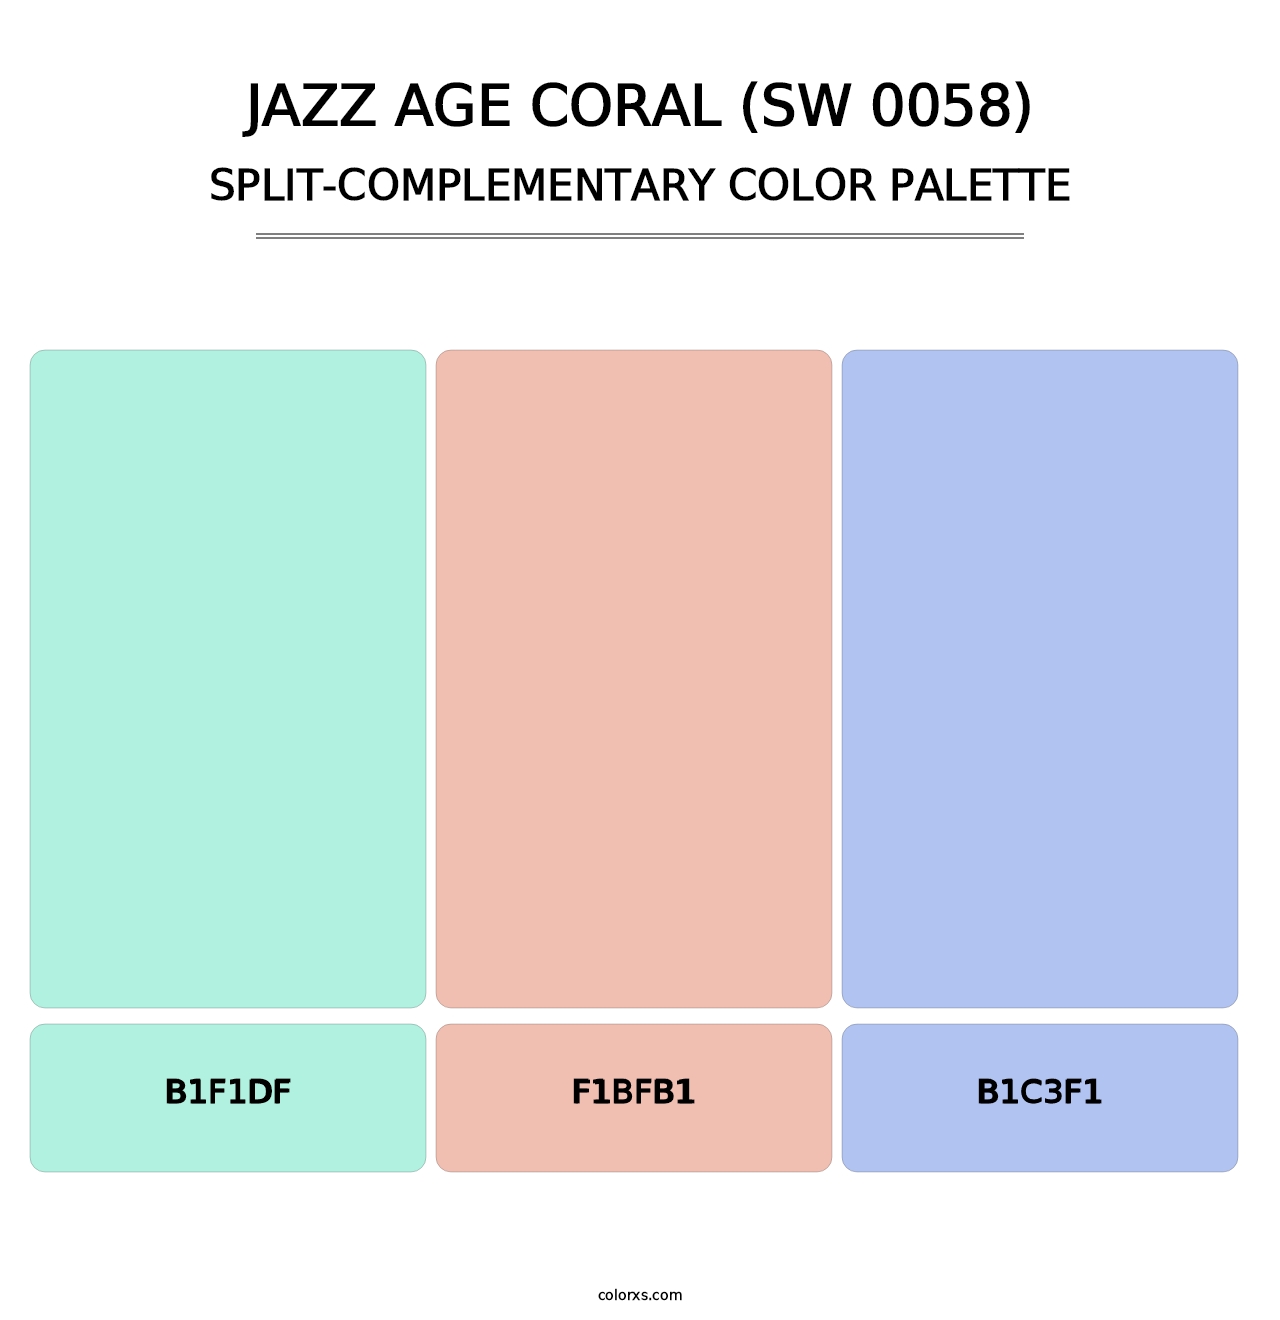 Jazz Age Coral (SW 0058) - Split-Complementary Color Palette